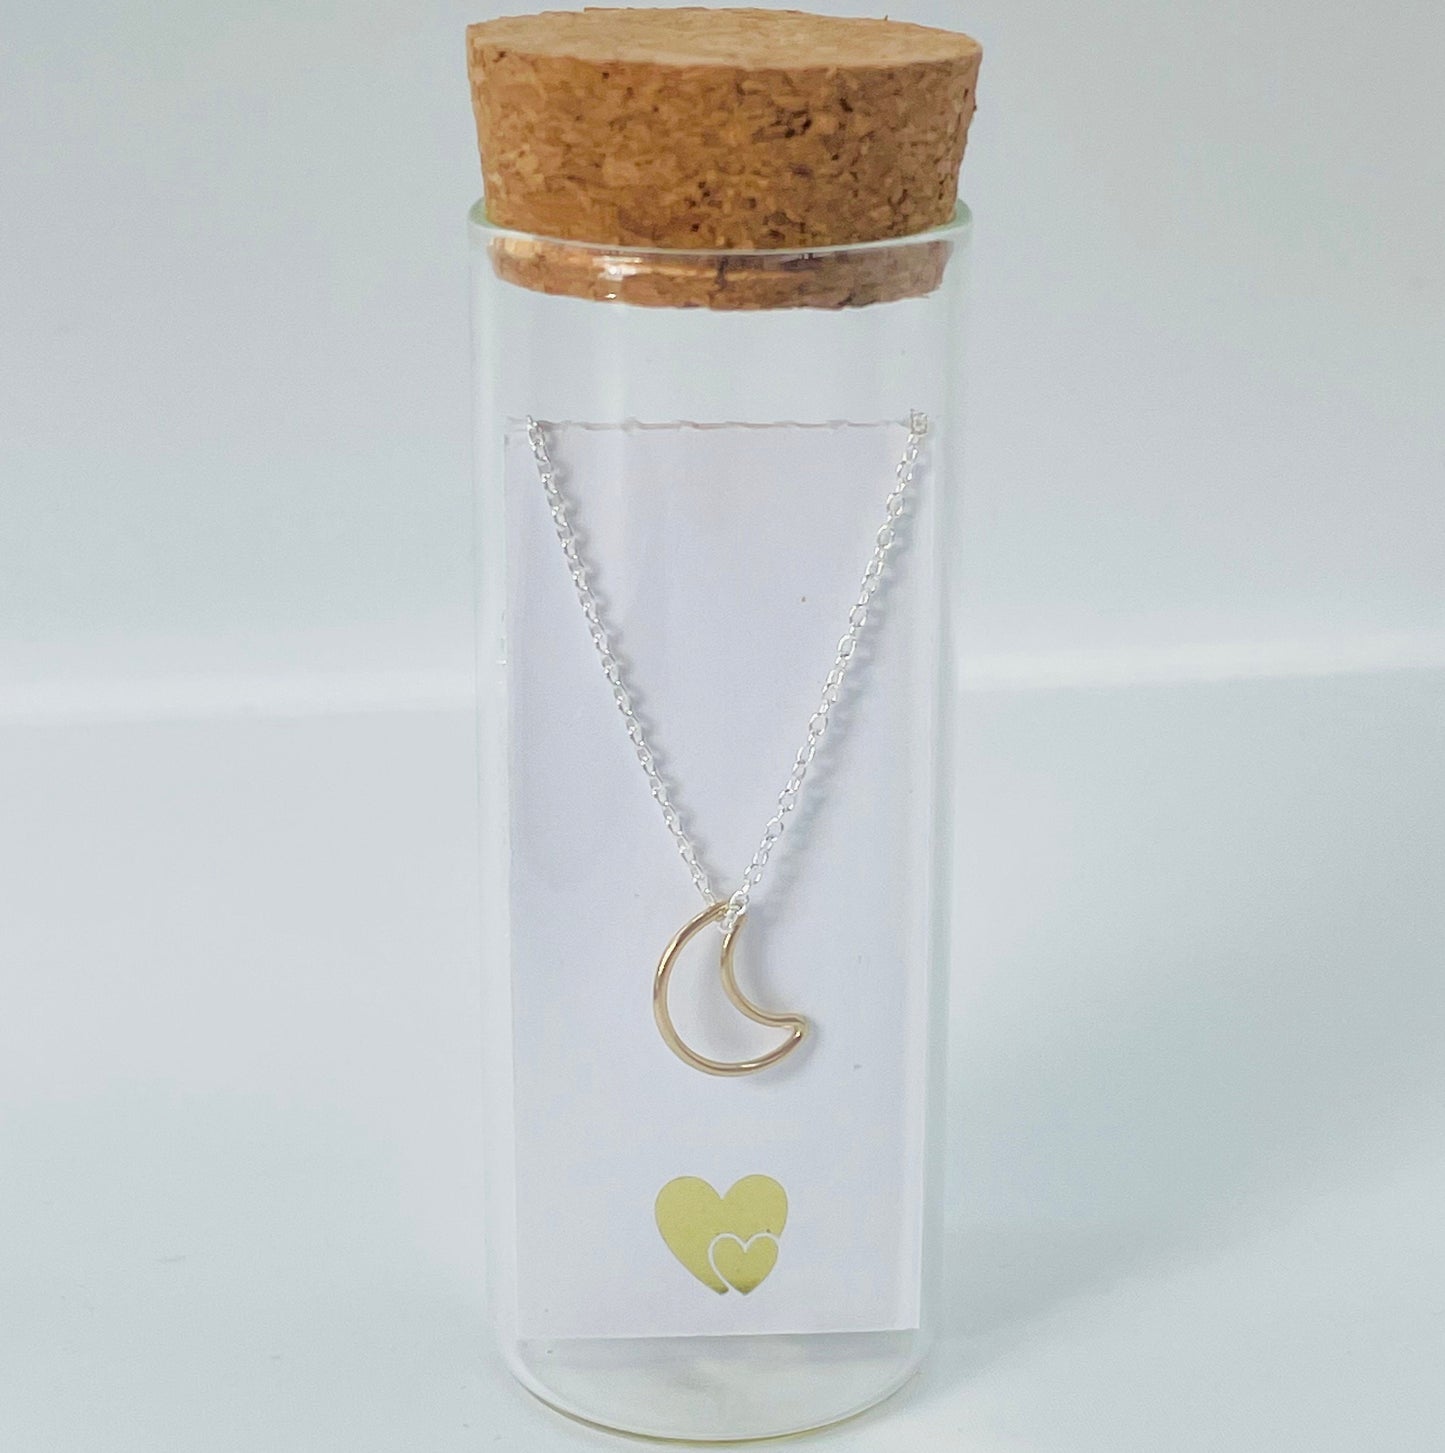 Gold vermeil hollow crescent moon hung from a sterling silver chain and placed in a glass bottle. Behind the card is a parchment scroll for you to add your own message.